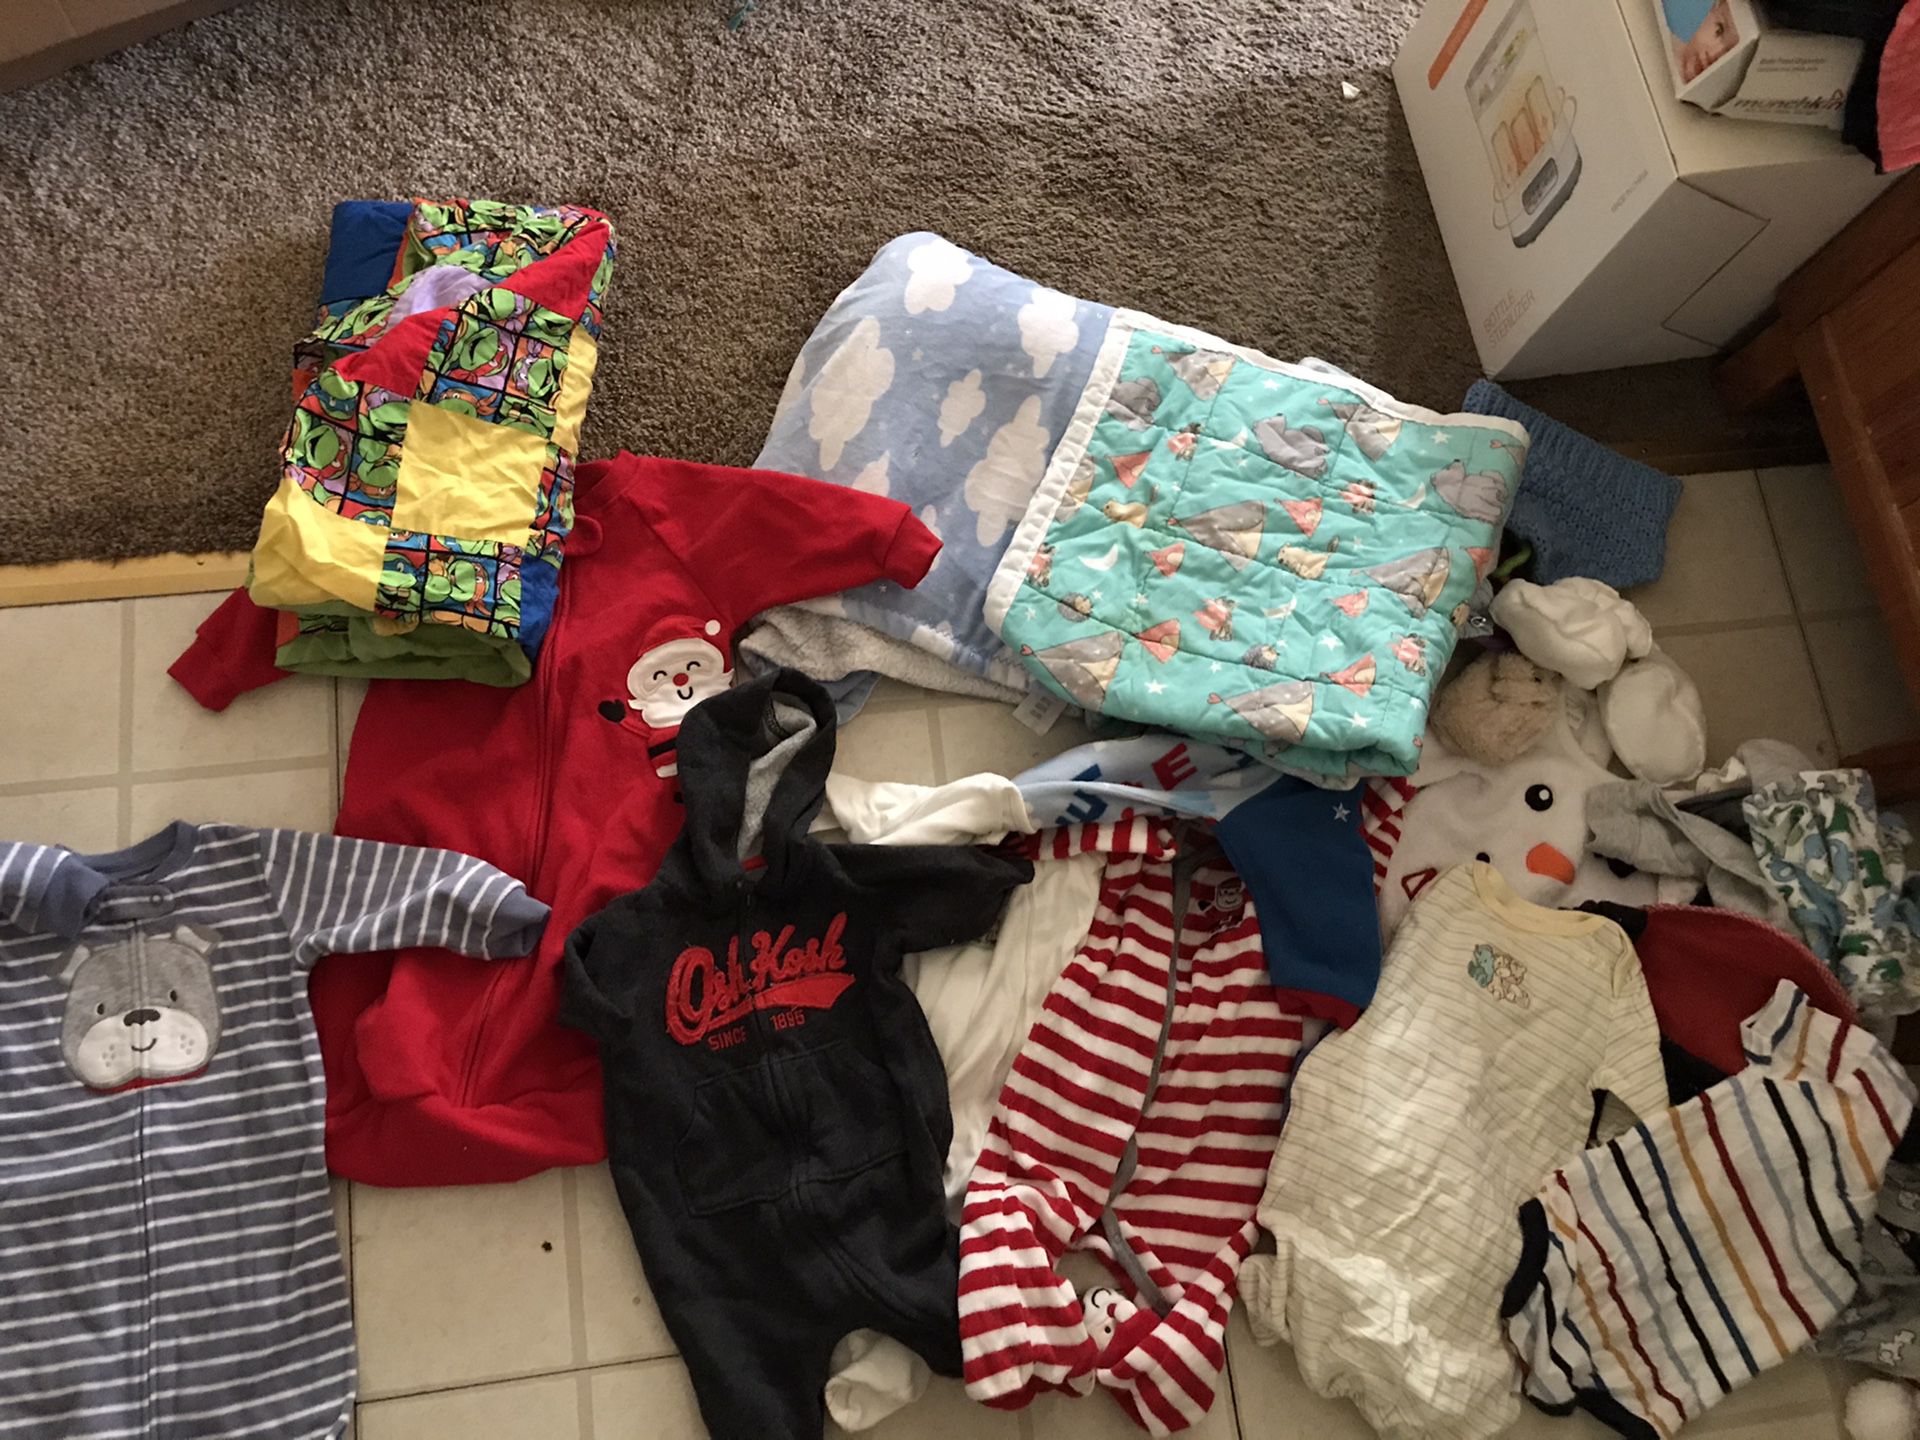 Free lot of used baby clothing, blankets, new baby carrier